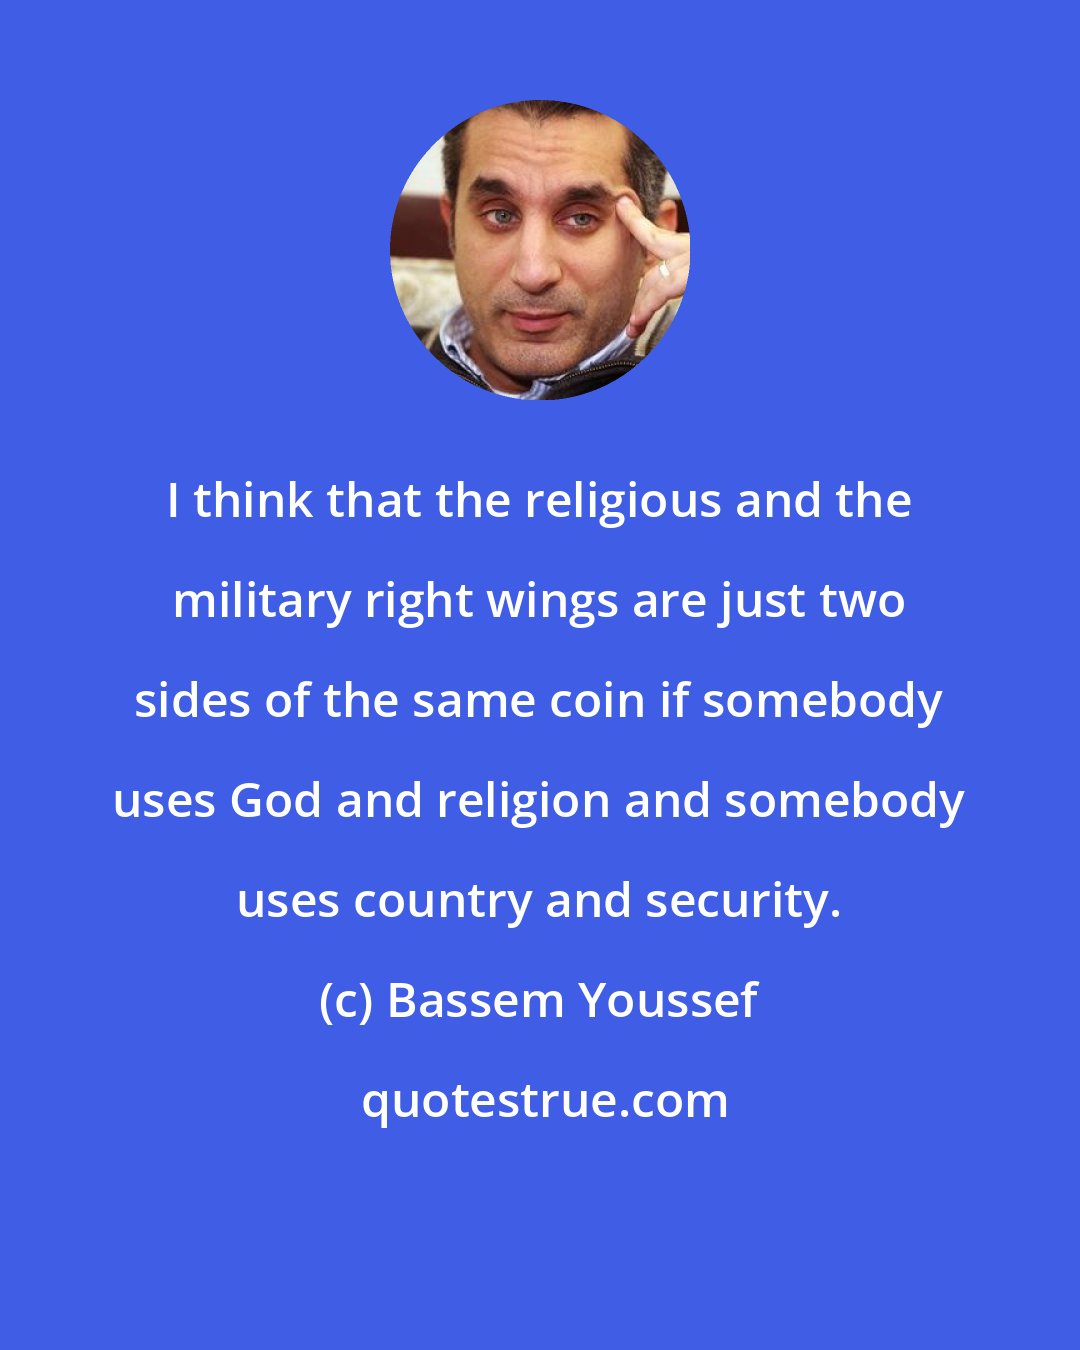 Bassem Youssef: I think that the religious and the military right wings are just two sides of the same coin if somebody uses God and religion and somebody uses country and security.